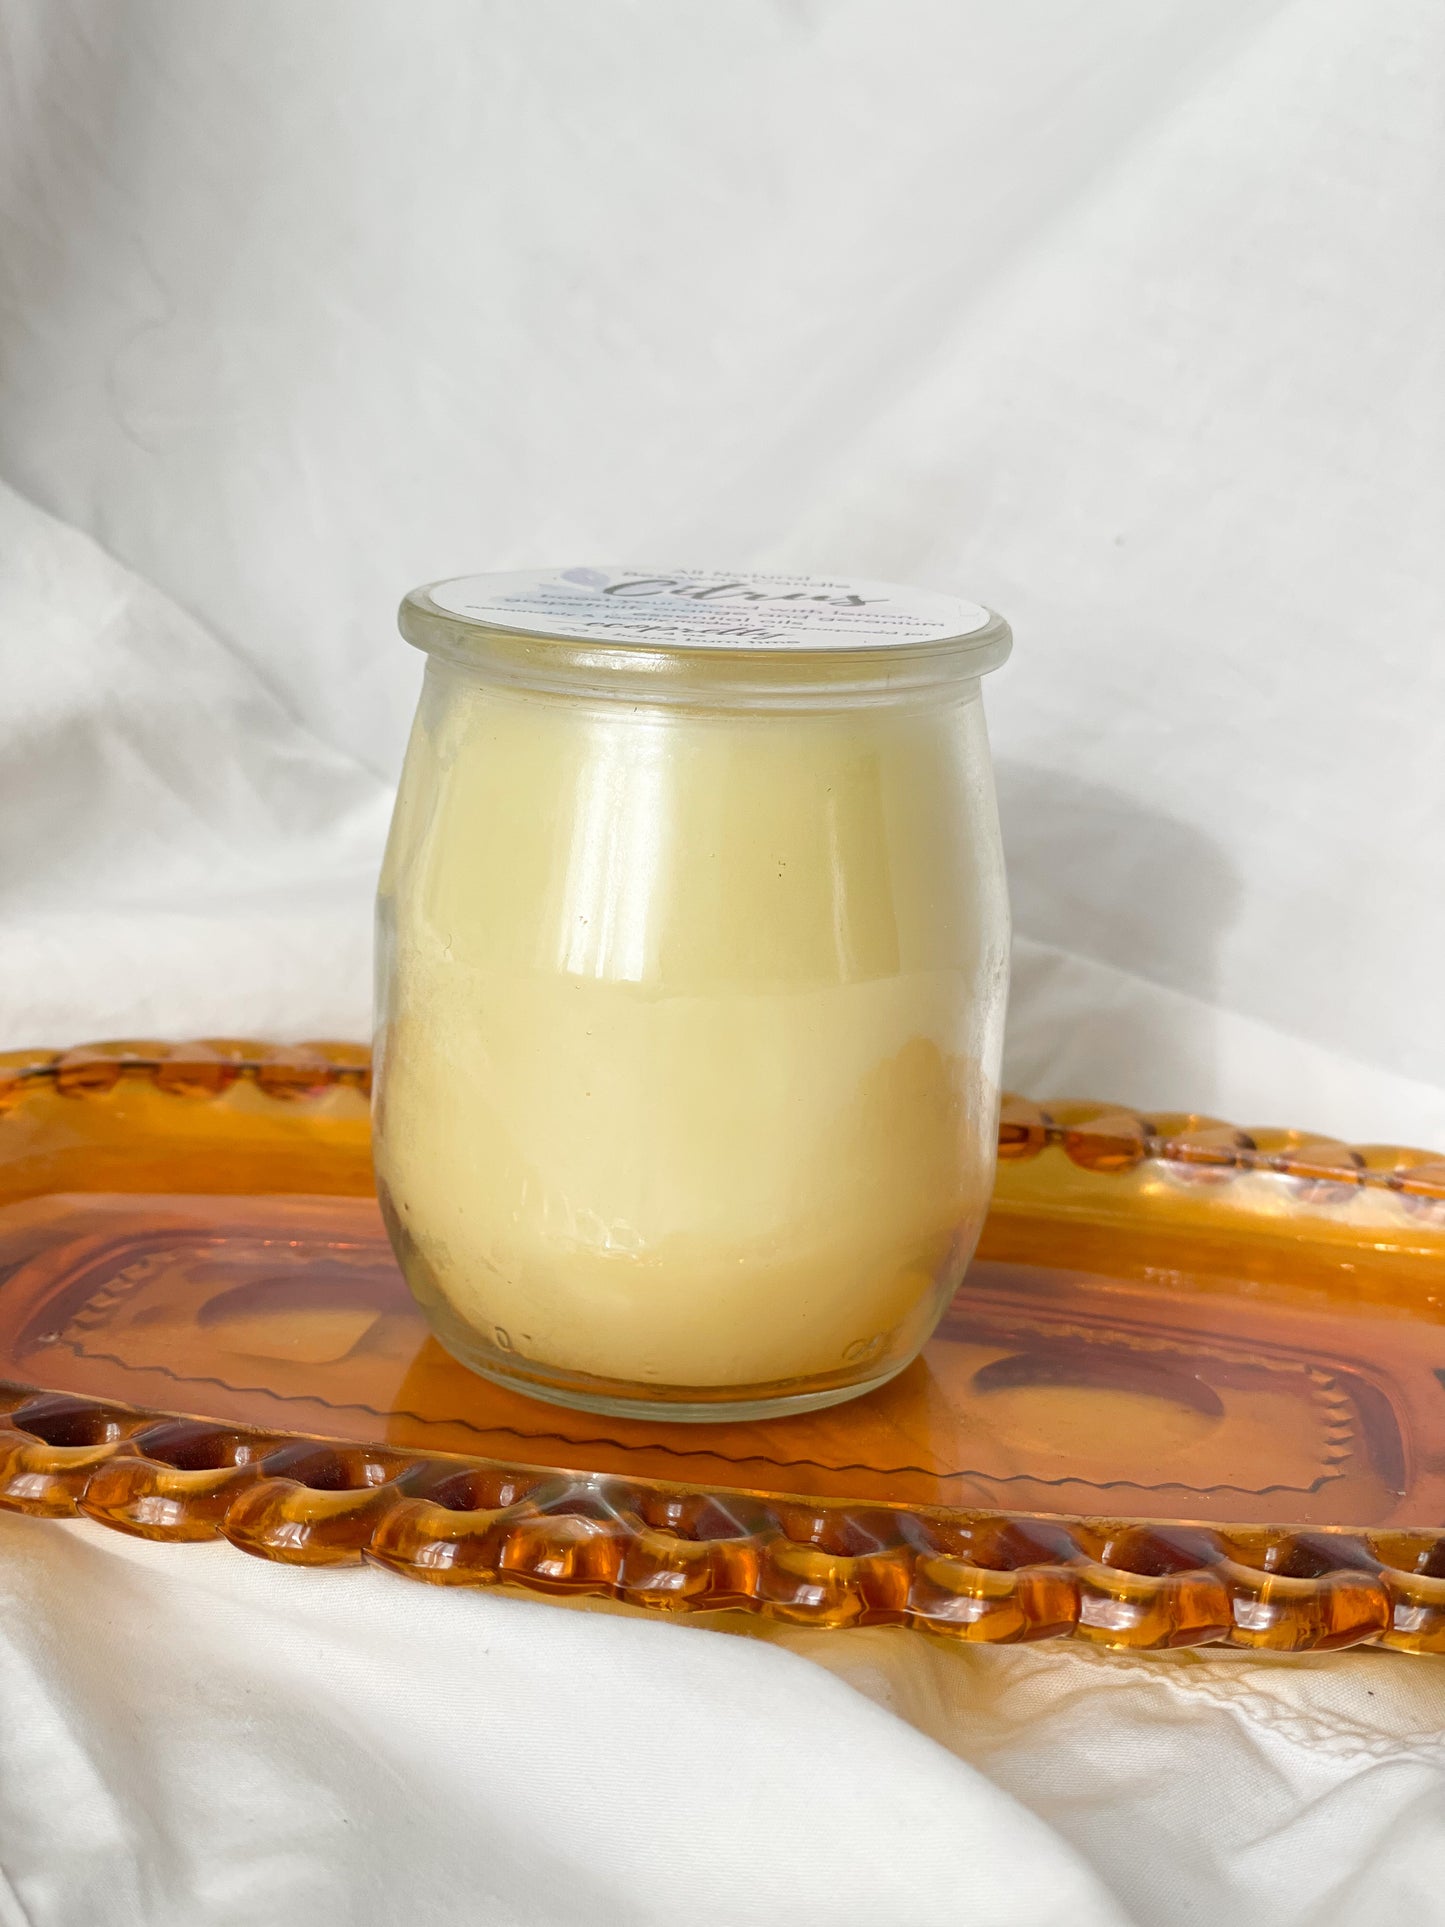 Citrus Creamsicle Natural Scented 100% Beeswax Candle - 4oz